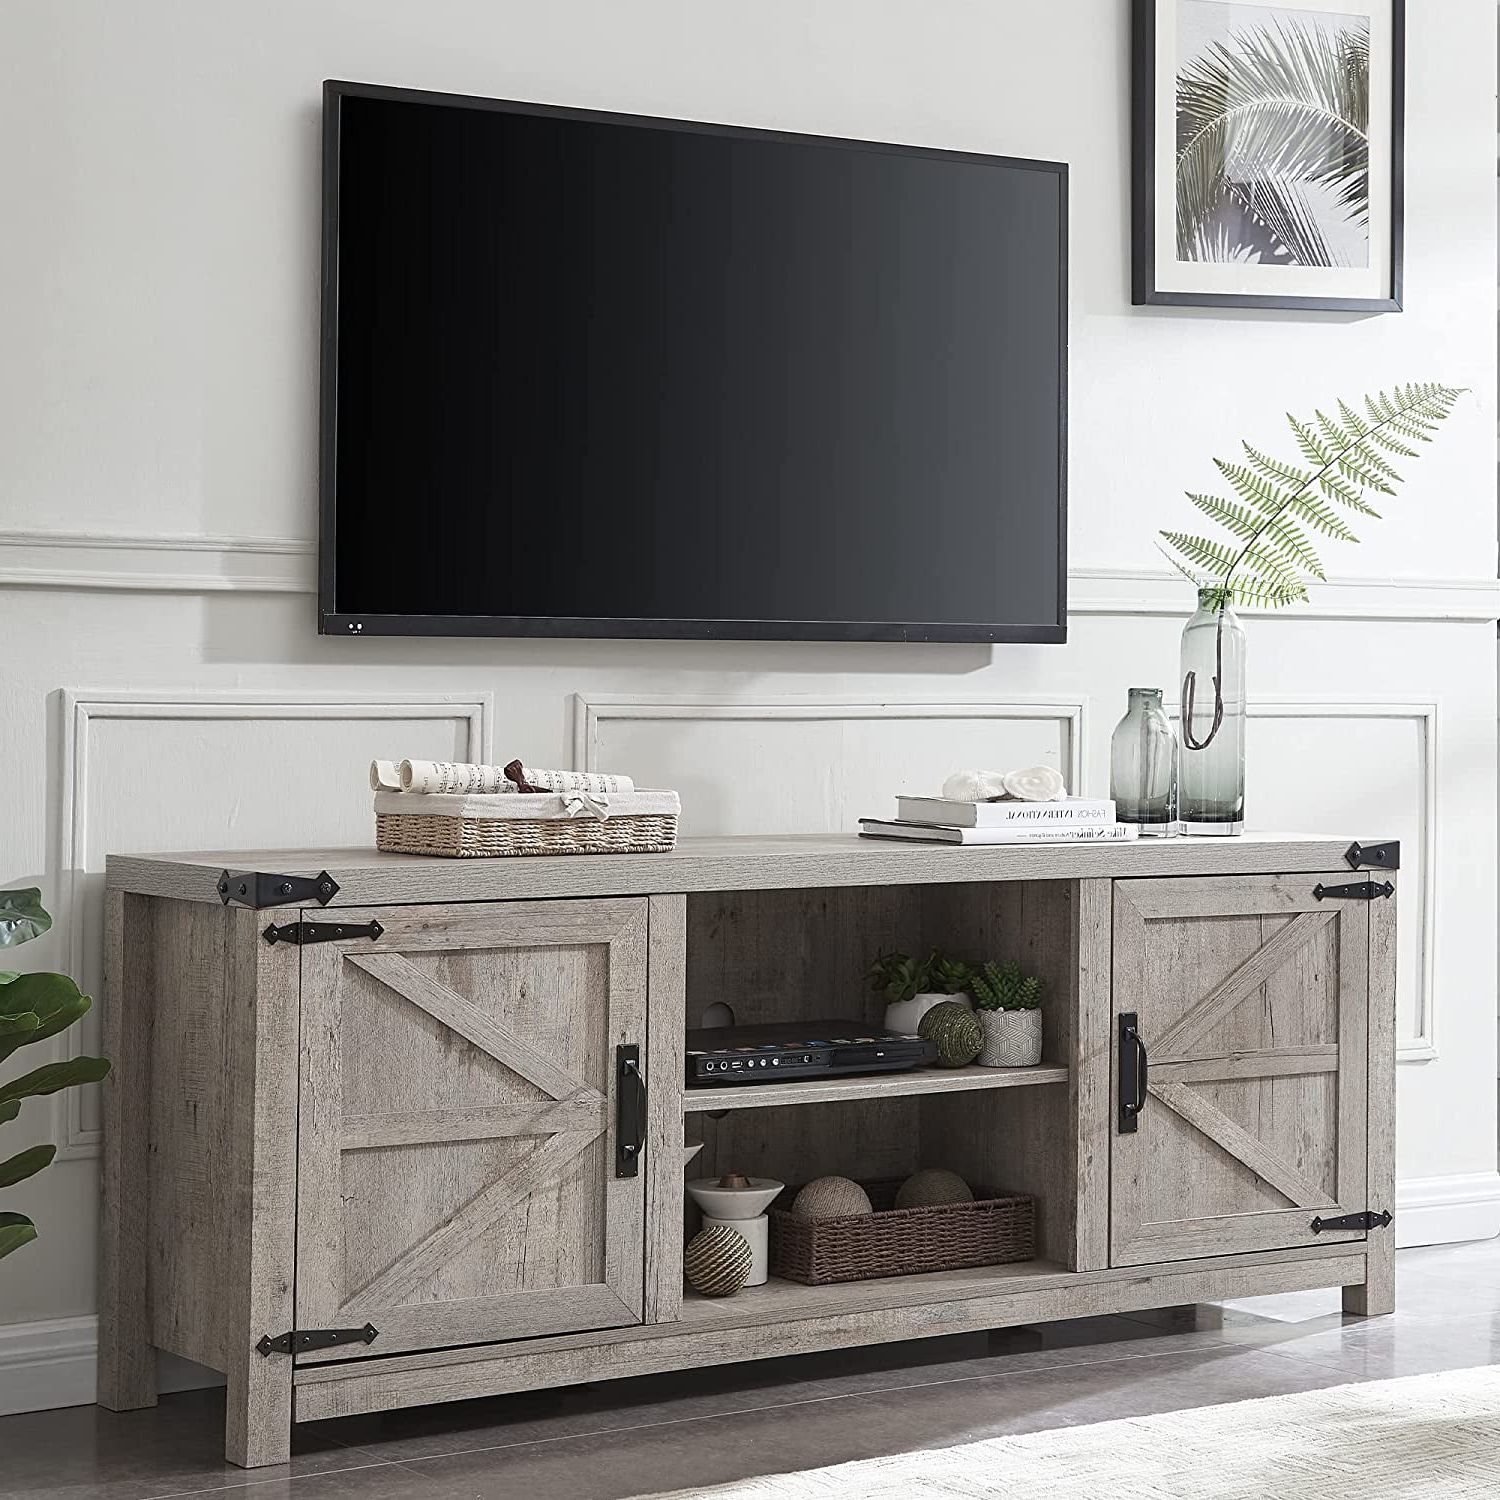 Okd Farmhouse Tv Stand For Tvs Up To 75 Inches, Wood Barn Door Media  Television Console Table With Storage Cabinets Shelves, Grey Wash –  Walmart With Regard To Barn Door Media Tv Stands (View 2 of 20)